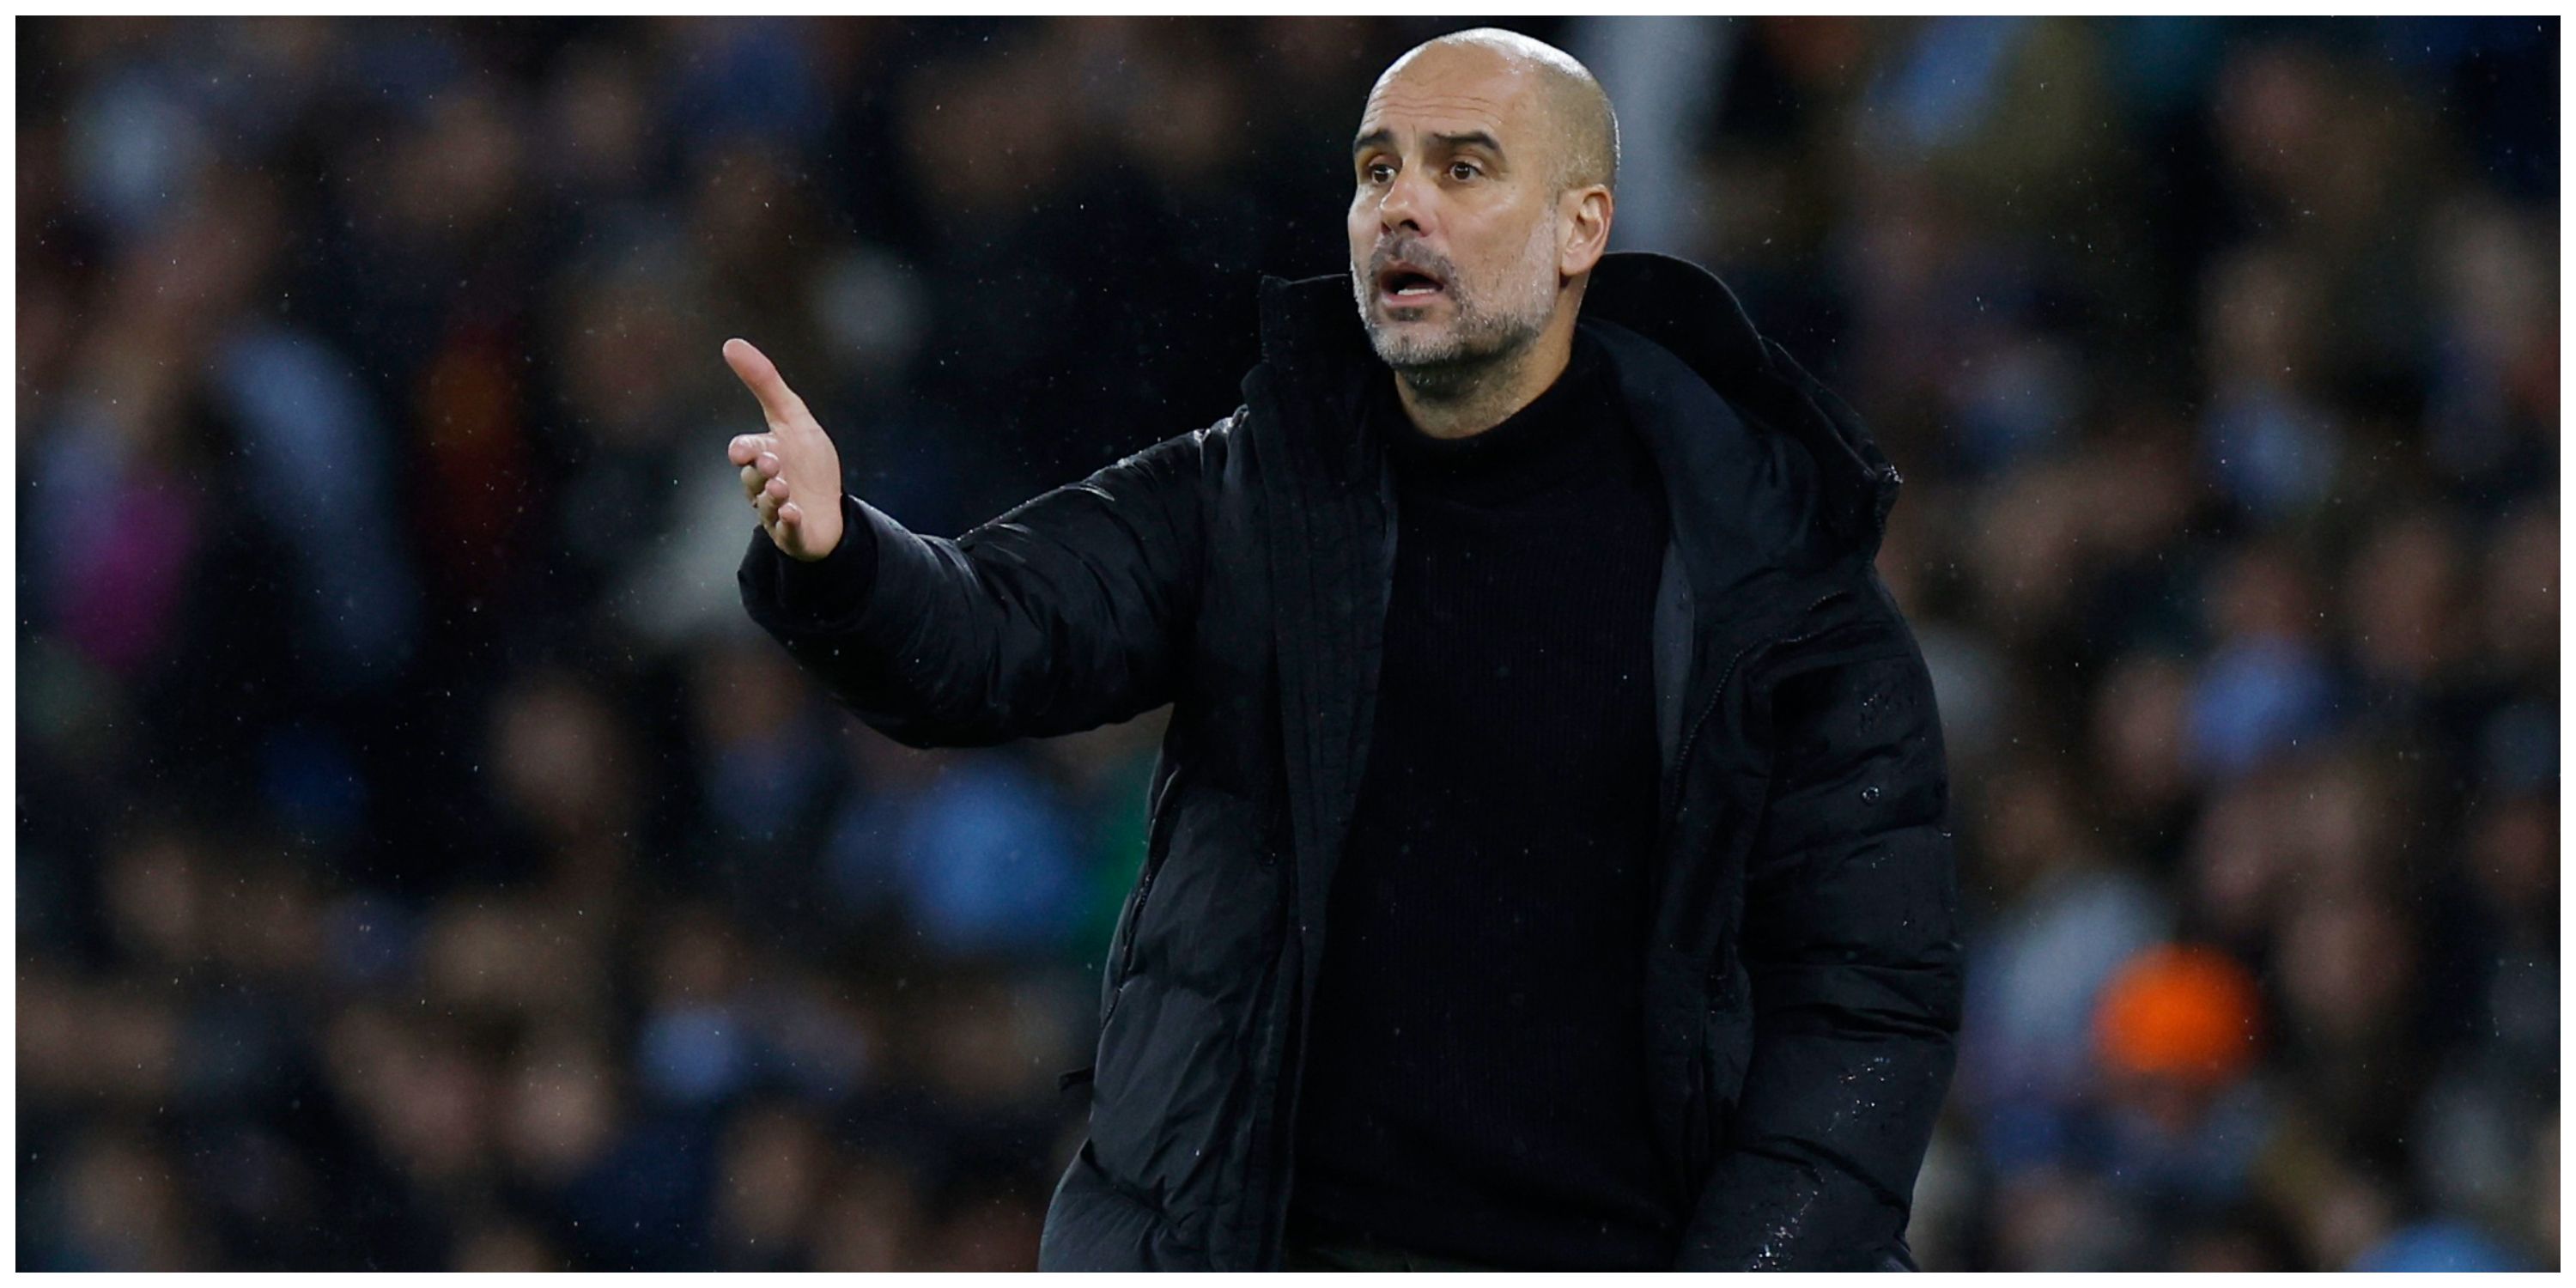 Manchester City manager Pep Guardiola with arm out